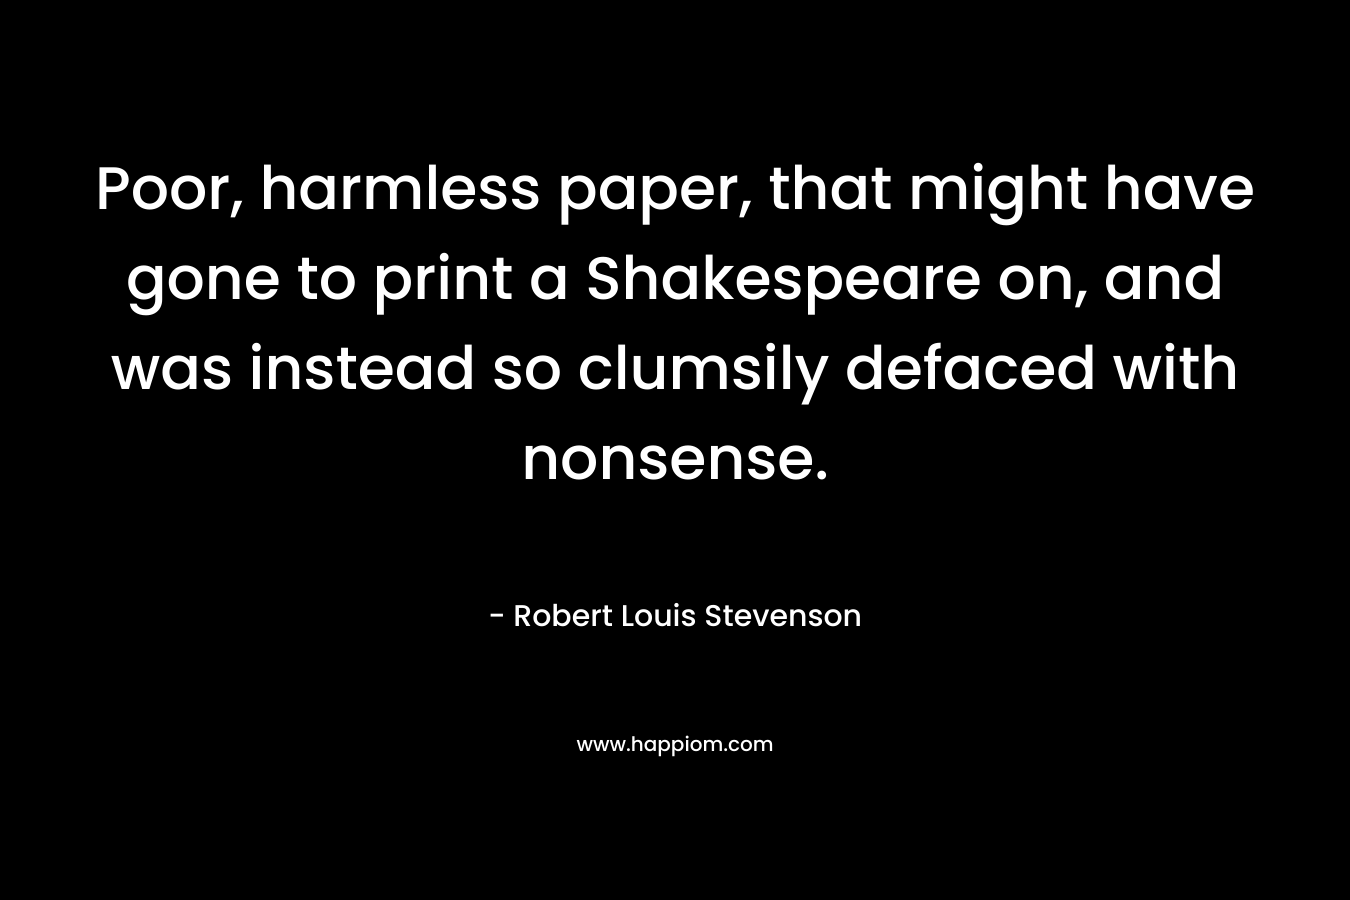 Poor, harmless paper, that might have gone to print a Shakespeare on, and was instead so clumsily defaced with nonsense. – Robert Louis Stevenson